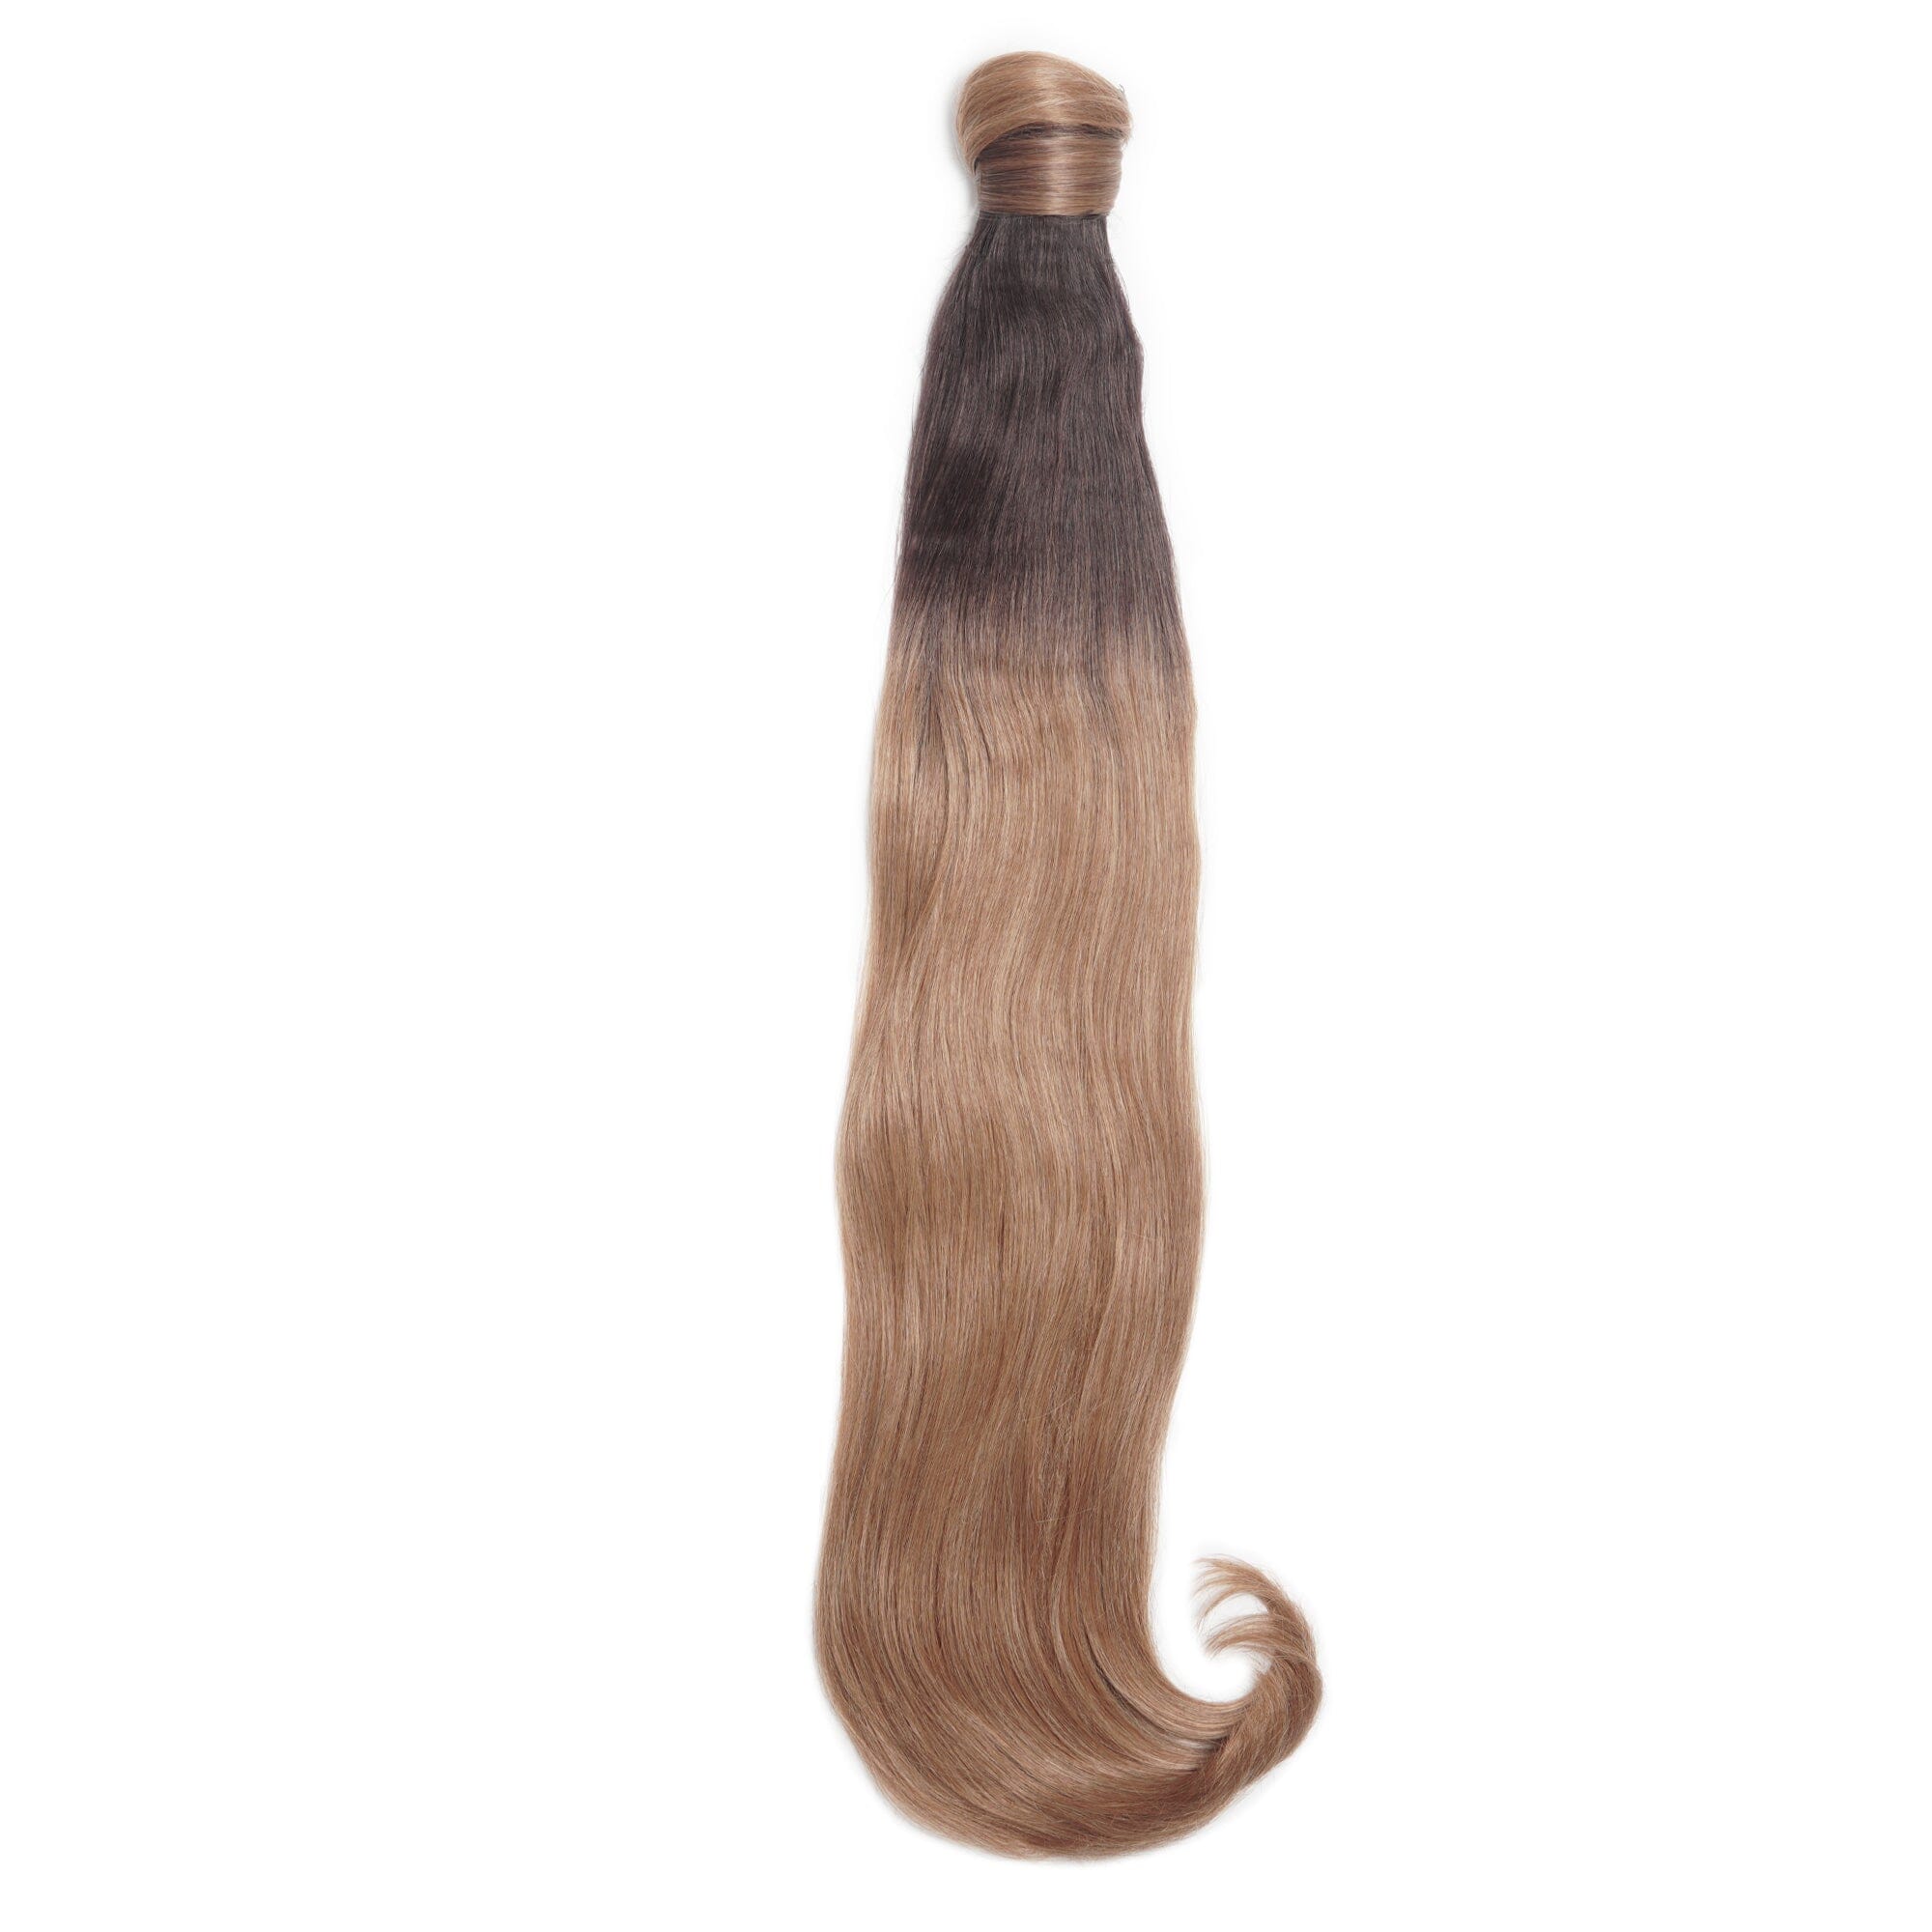 Long Clip-In Ponytails (22" - 30") Clip In Ponytail Easilocks 26" Silky Straight Bouncy Ponytail Medium Brown Ombre 